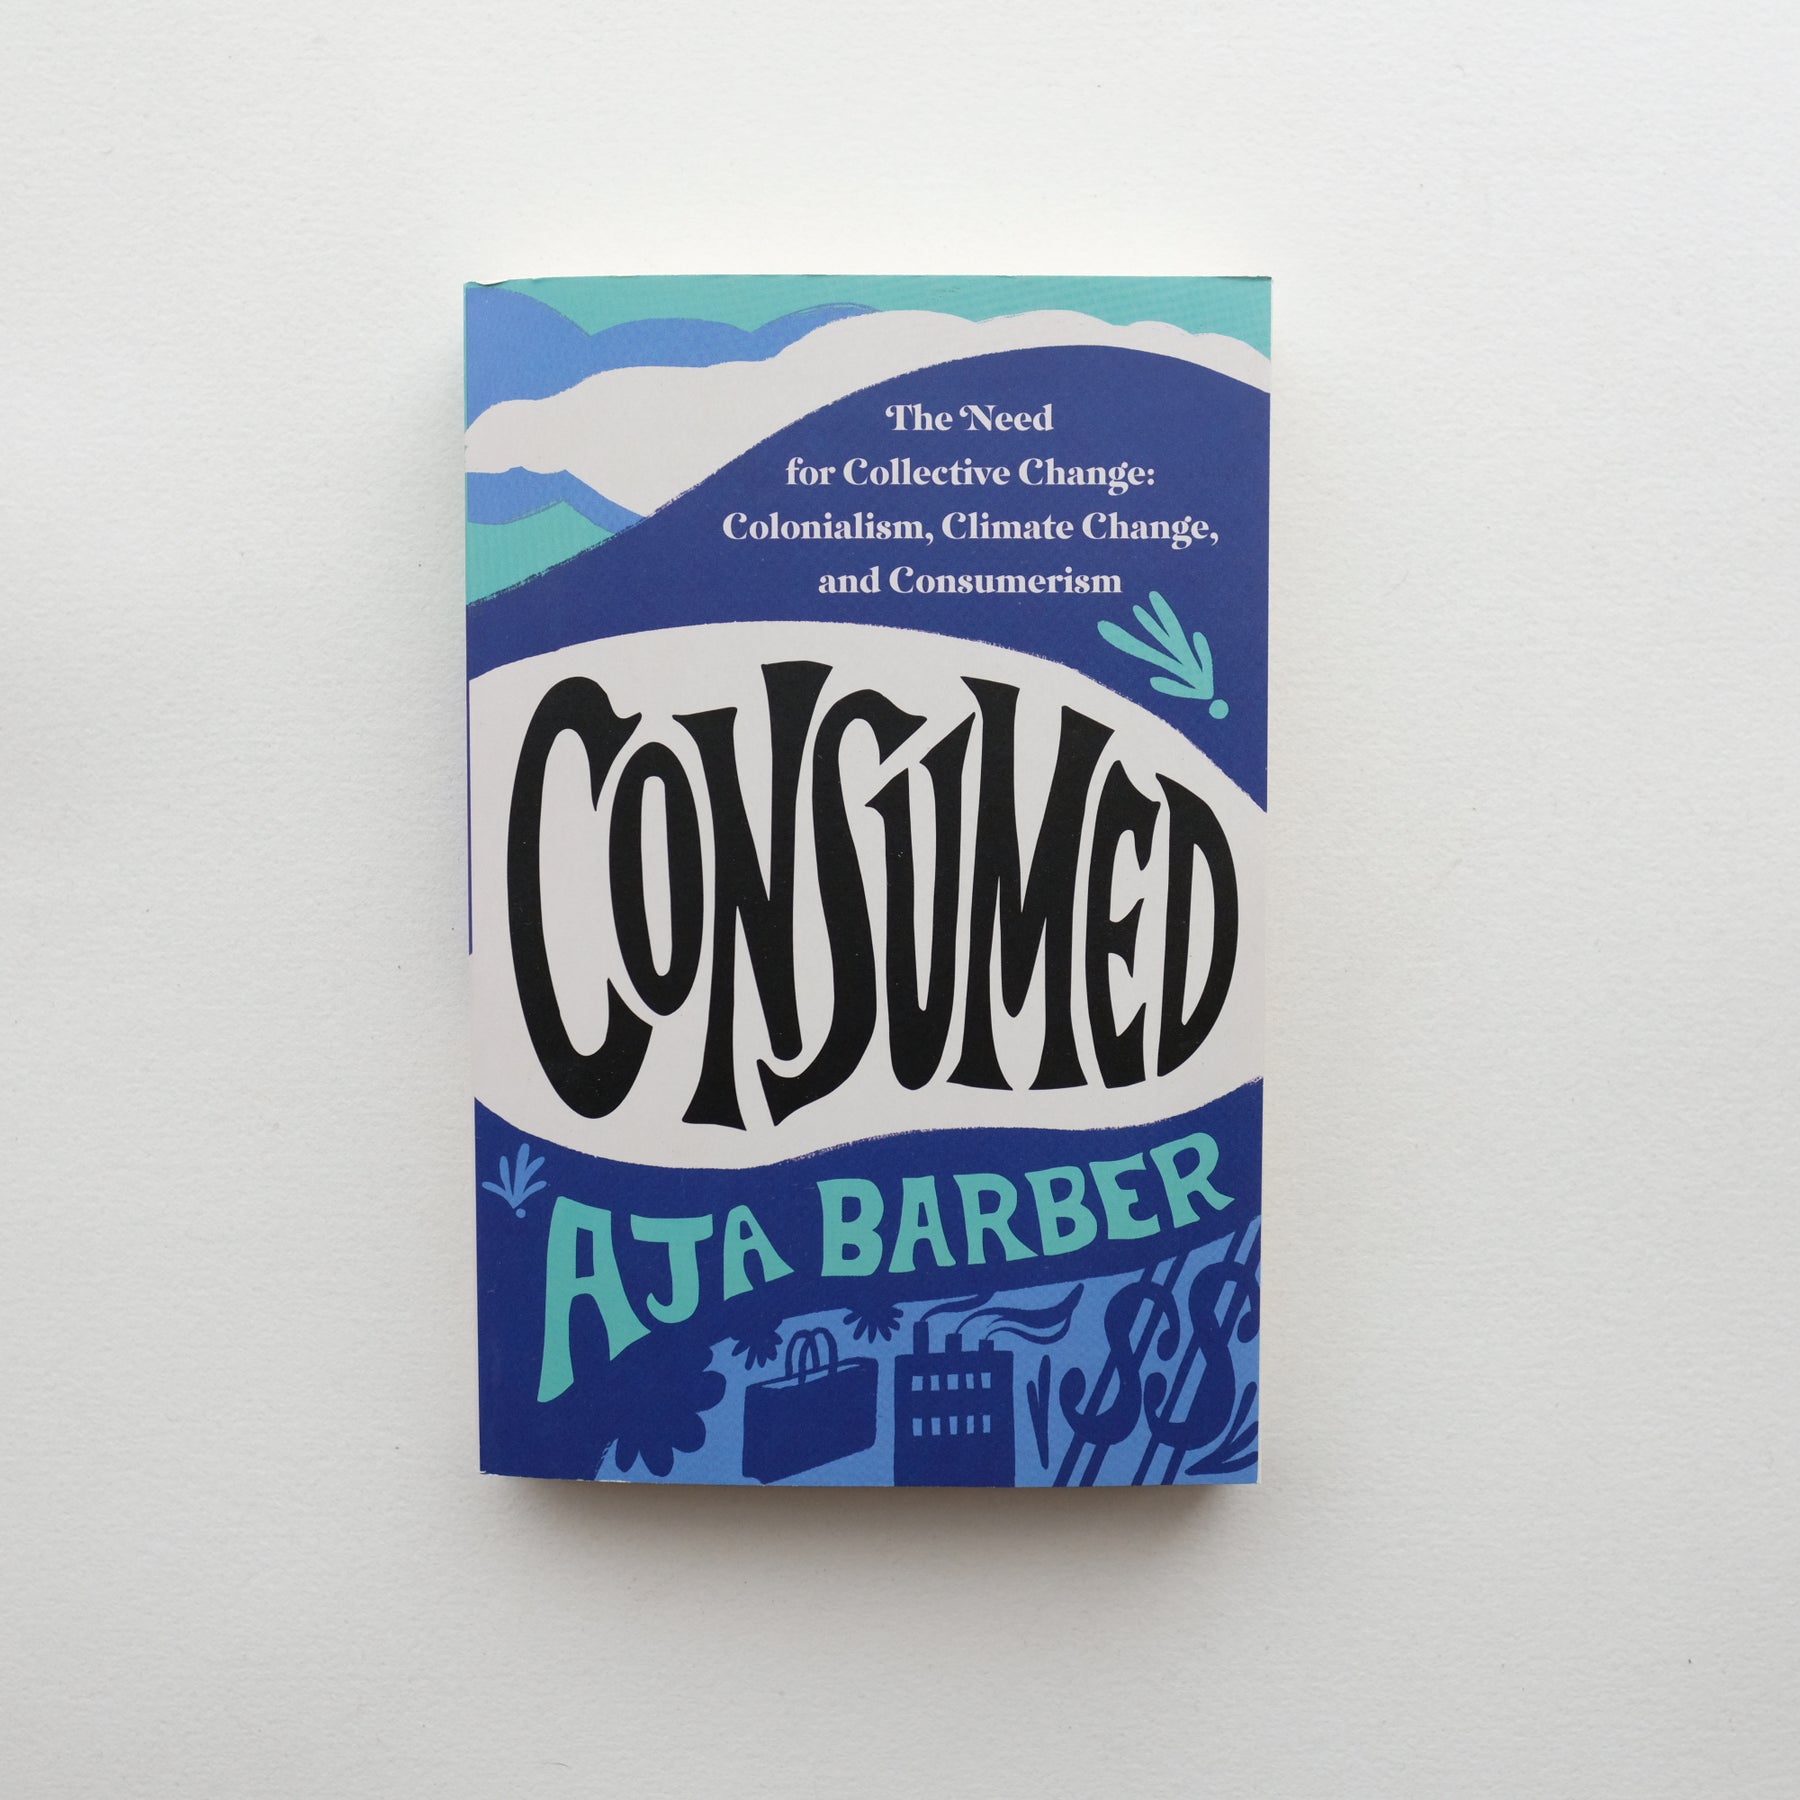 Consumed: The Need for Collective Change: Colonialism, Climate Change, Consumerism by Aja Barber